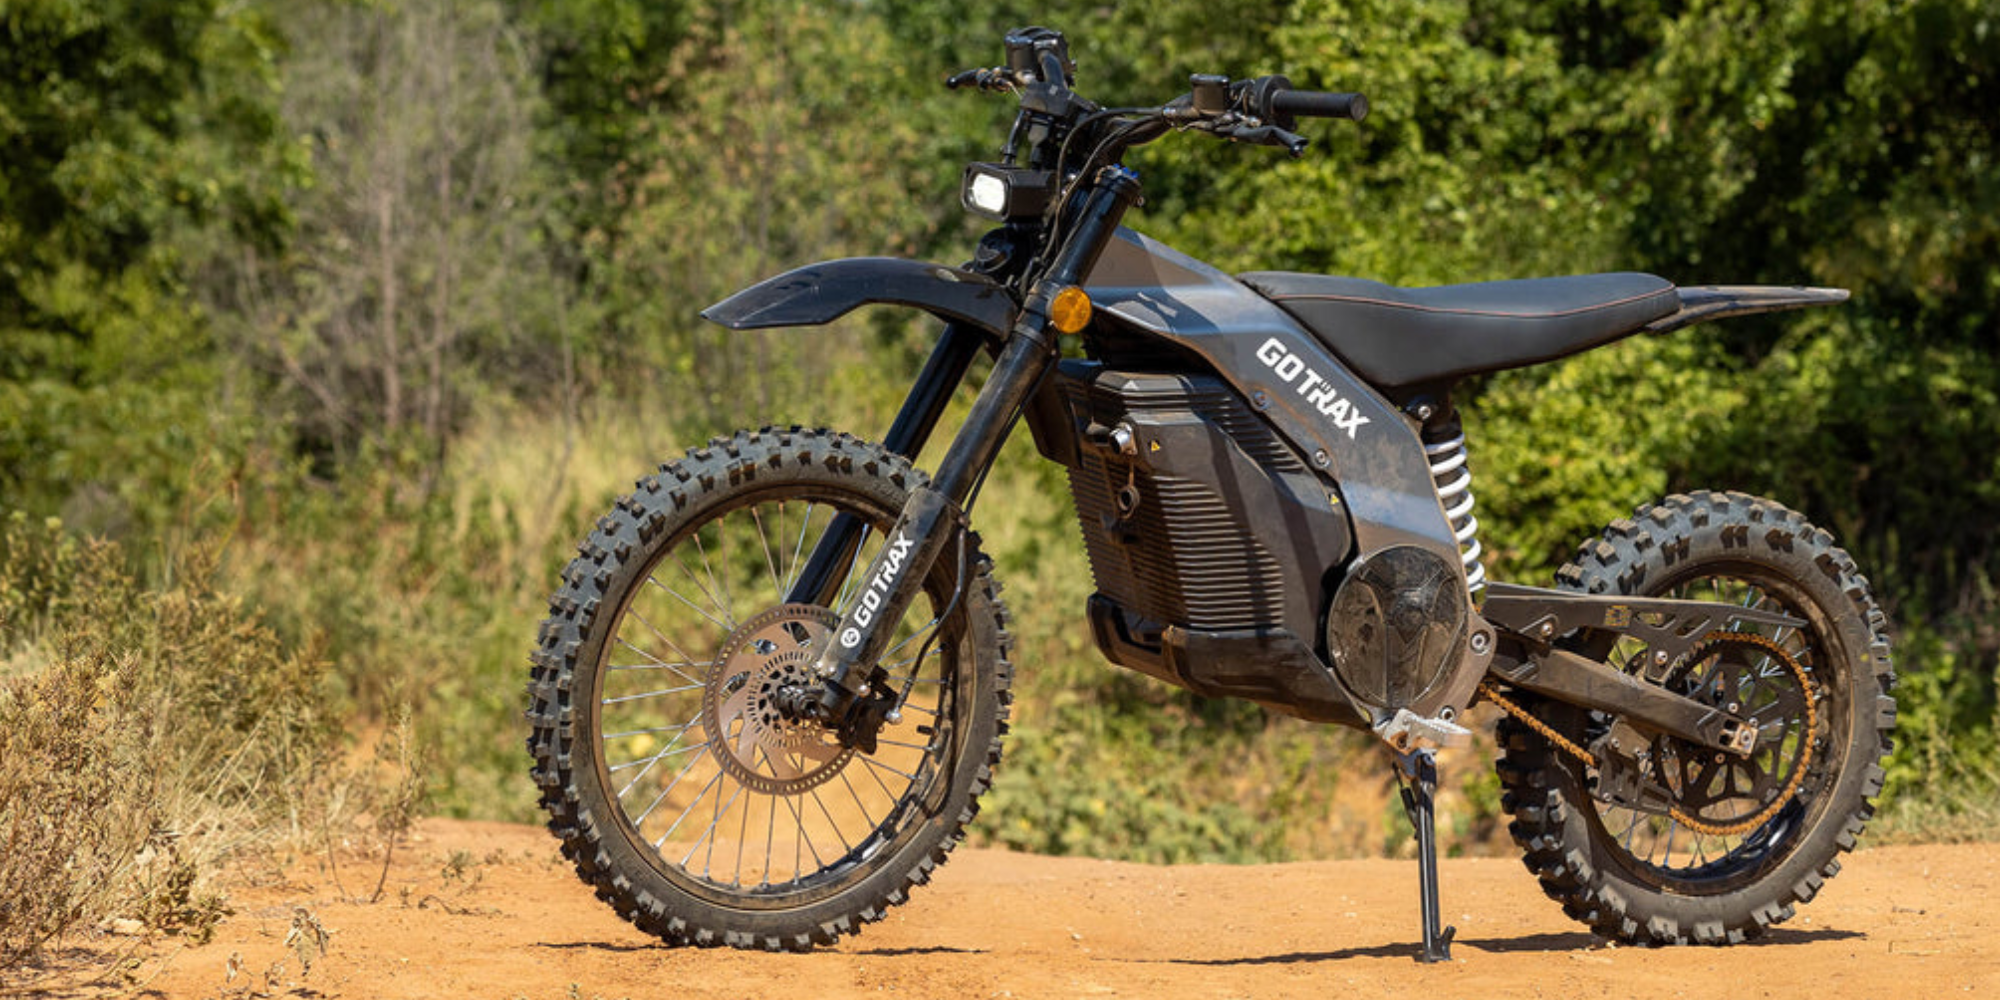 GoTraxs new Everest Electric Dirt Bike can hit 50 MPH speeds, sees first discount at $500 off